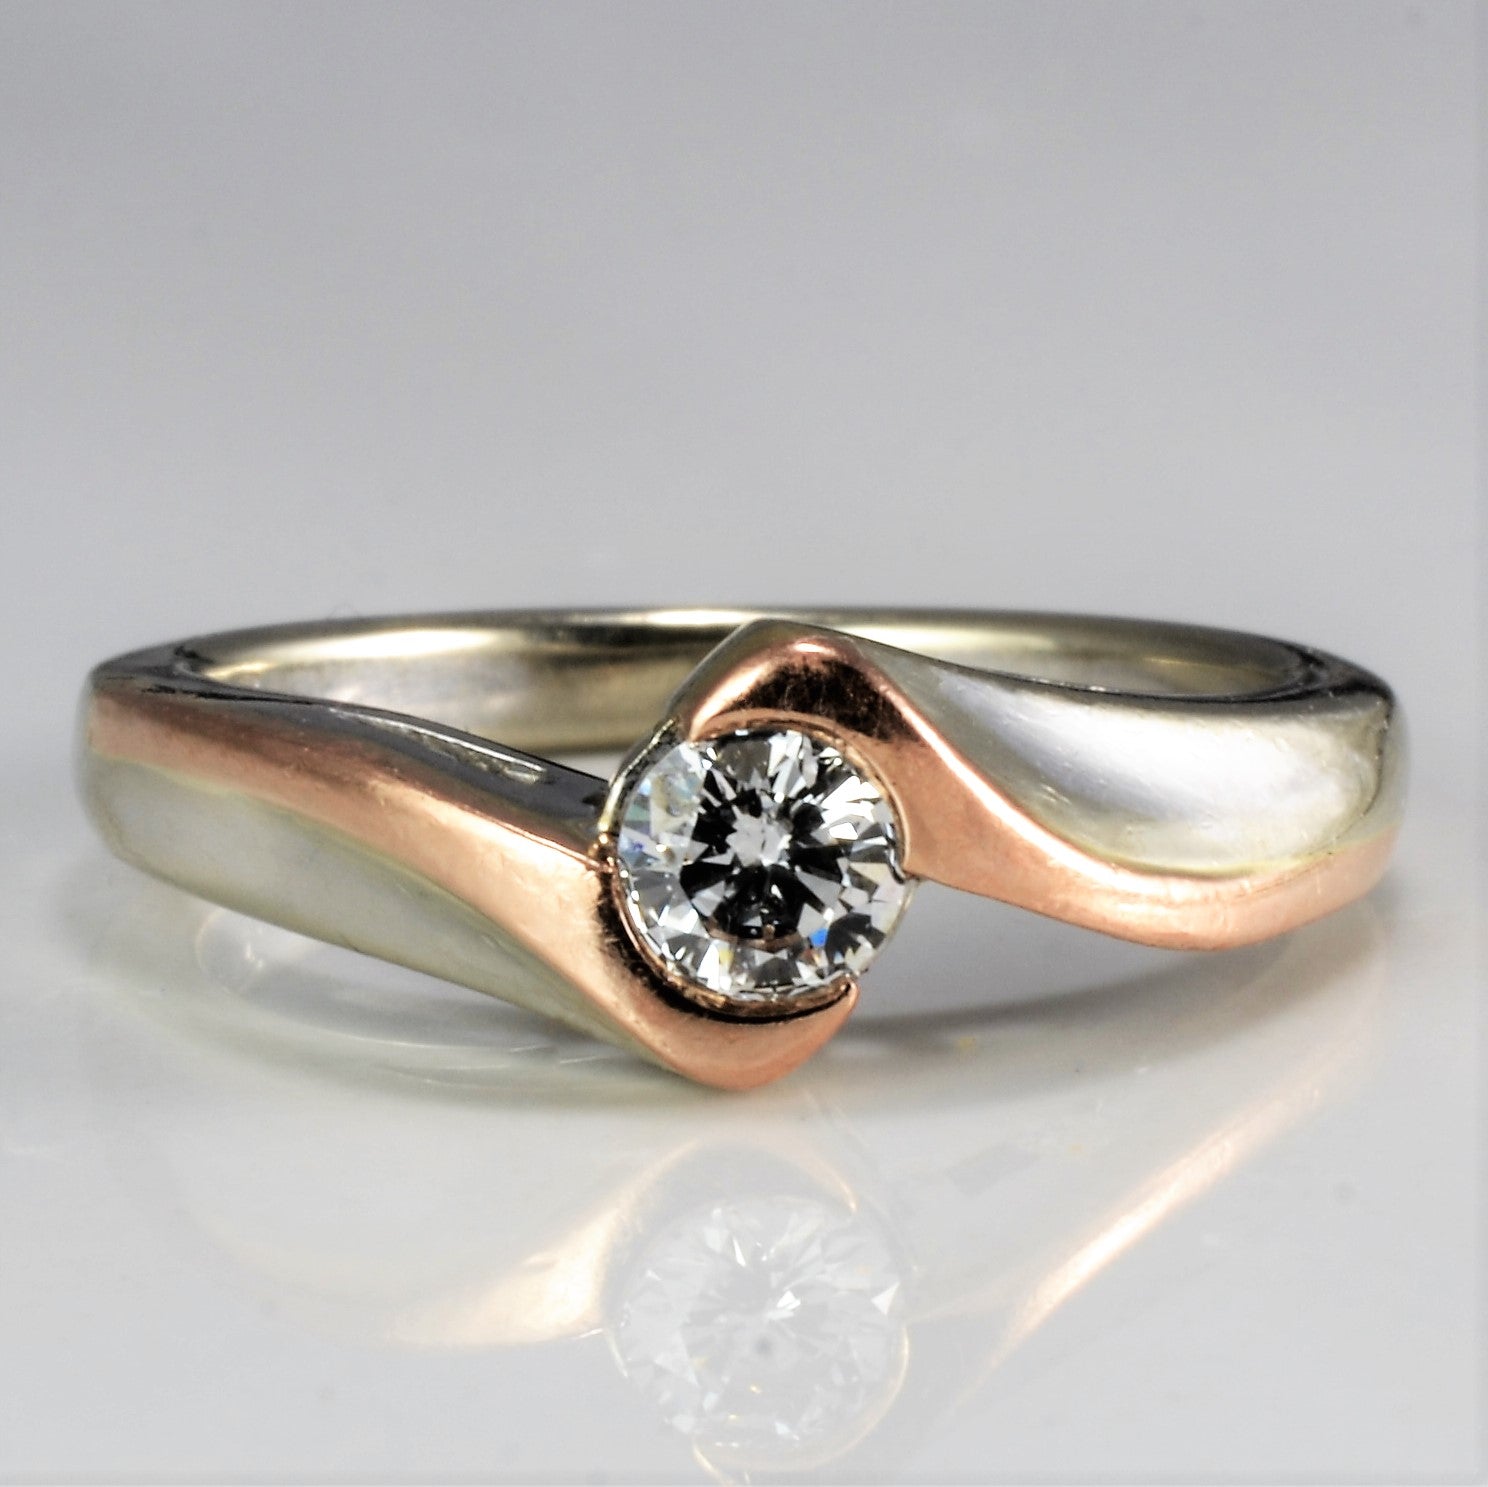 Two Tone Gold Bypass Diamond Ring | 0.26 ct, SZ 6.5 |